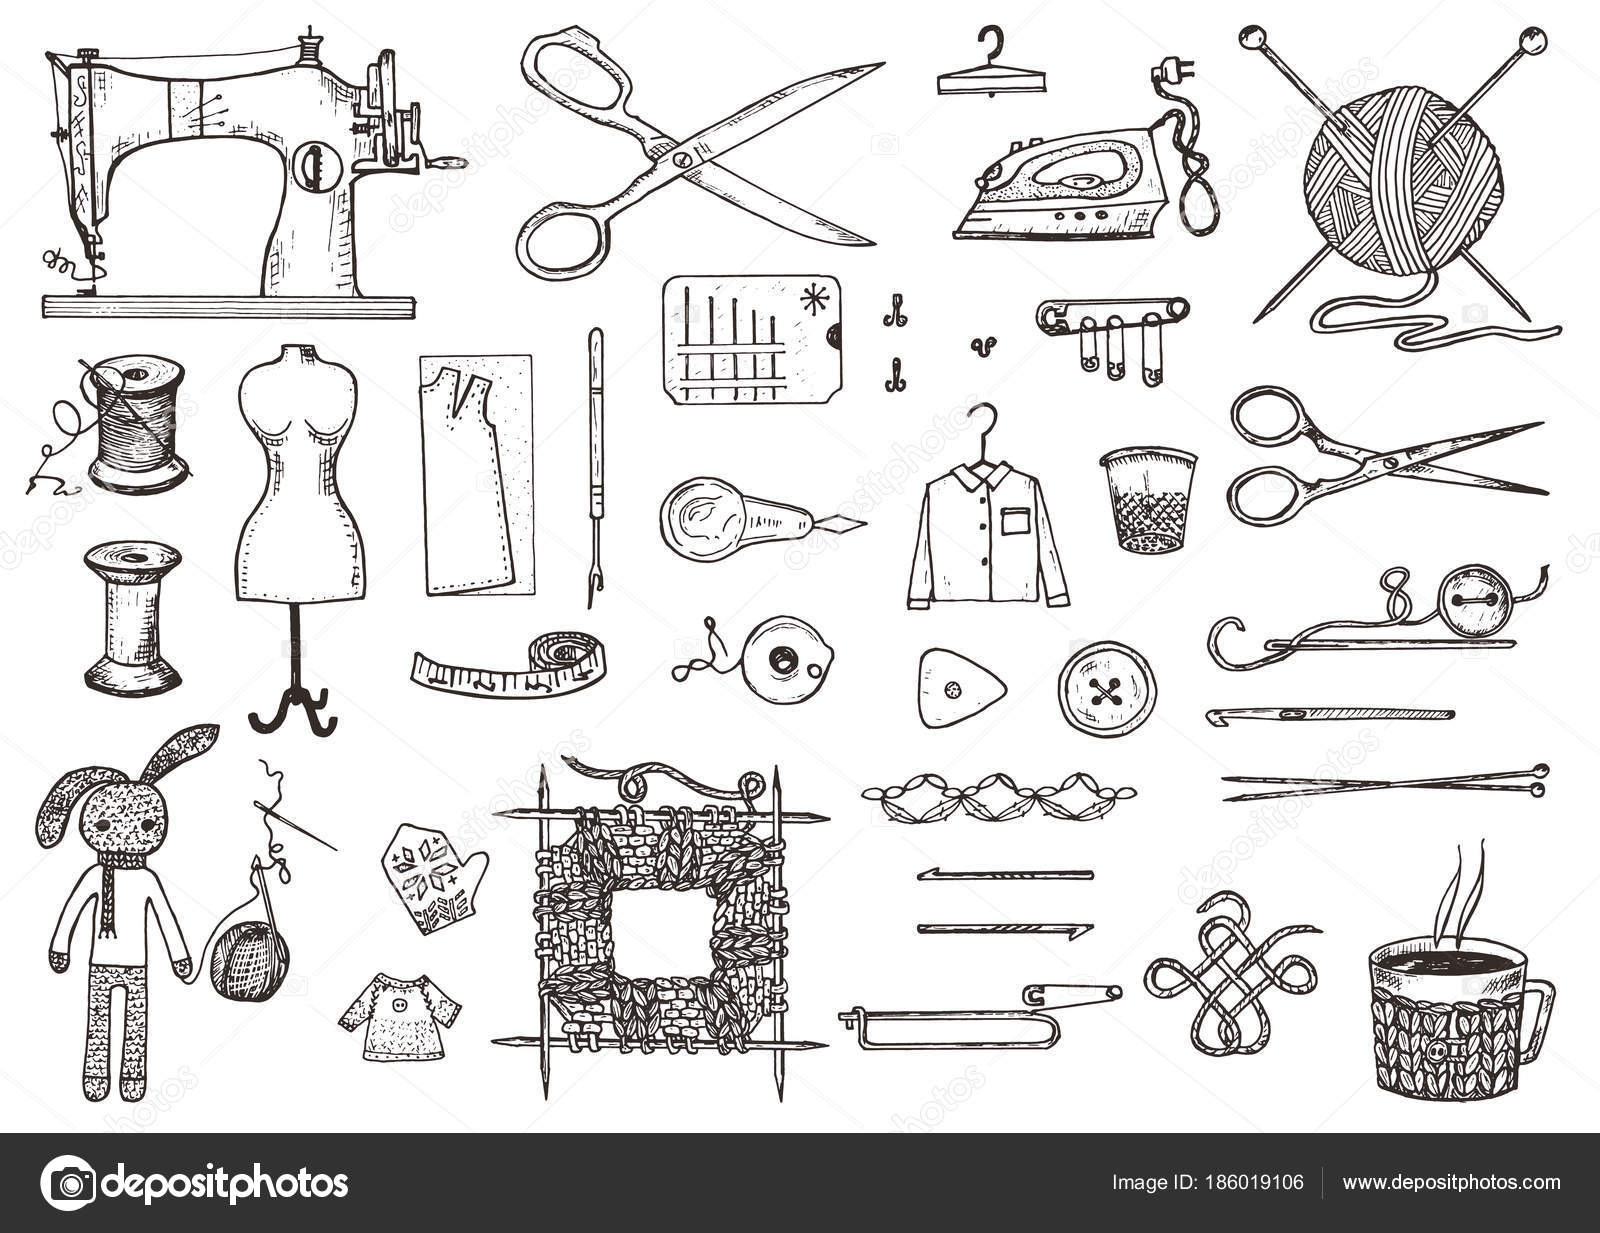 Set Of Sewing Accessories Drawings Stock Illustration - Download